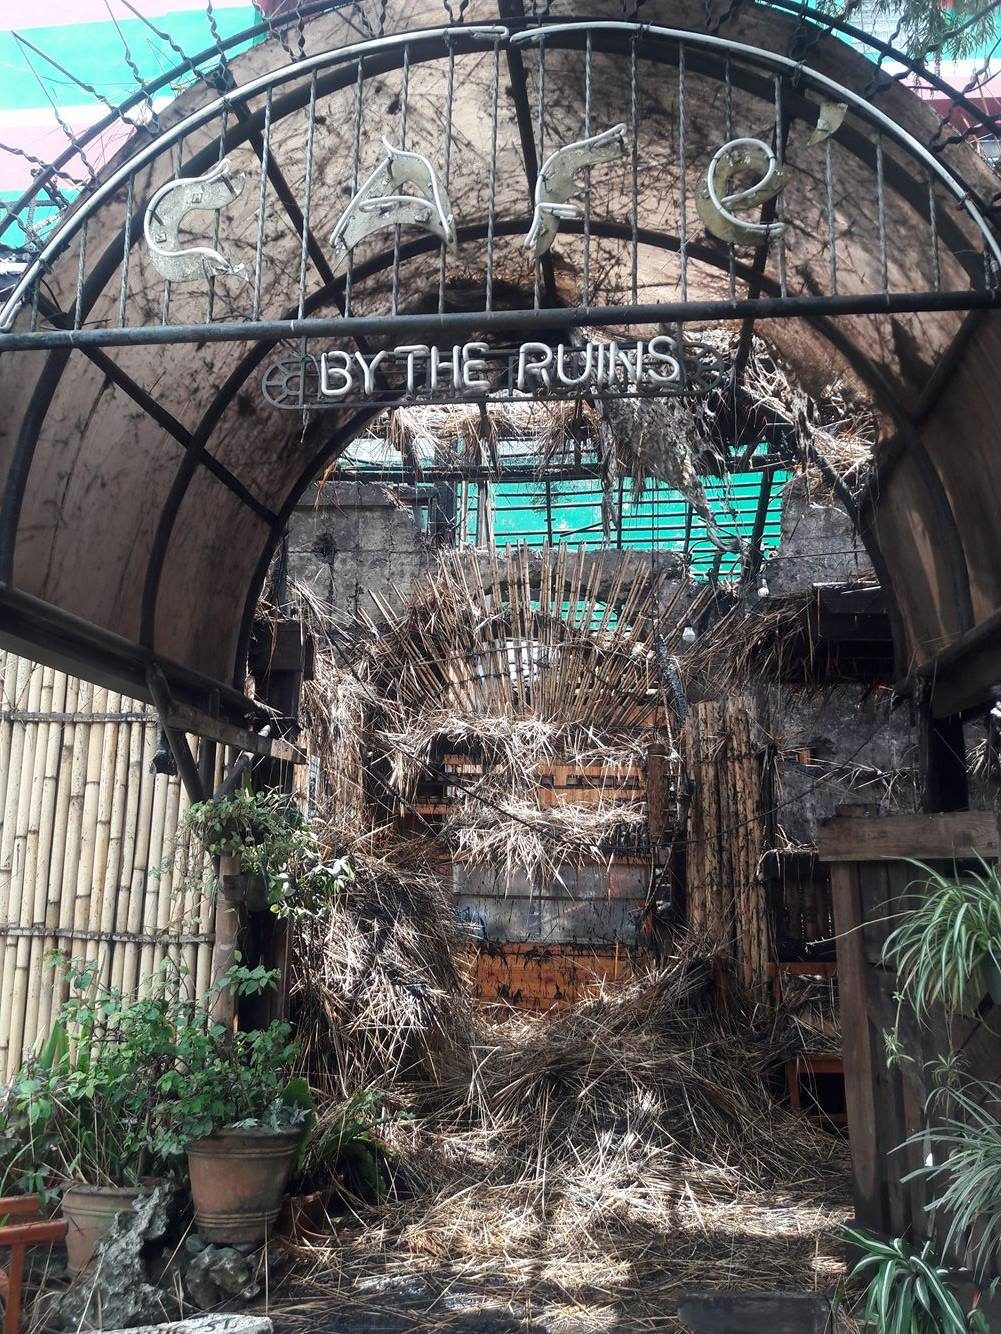 IN PHOTOS: Cafe by the Ruins before and after the fire